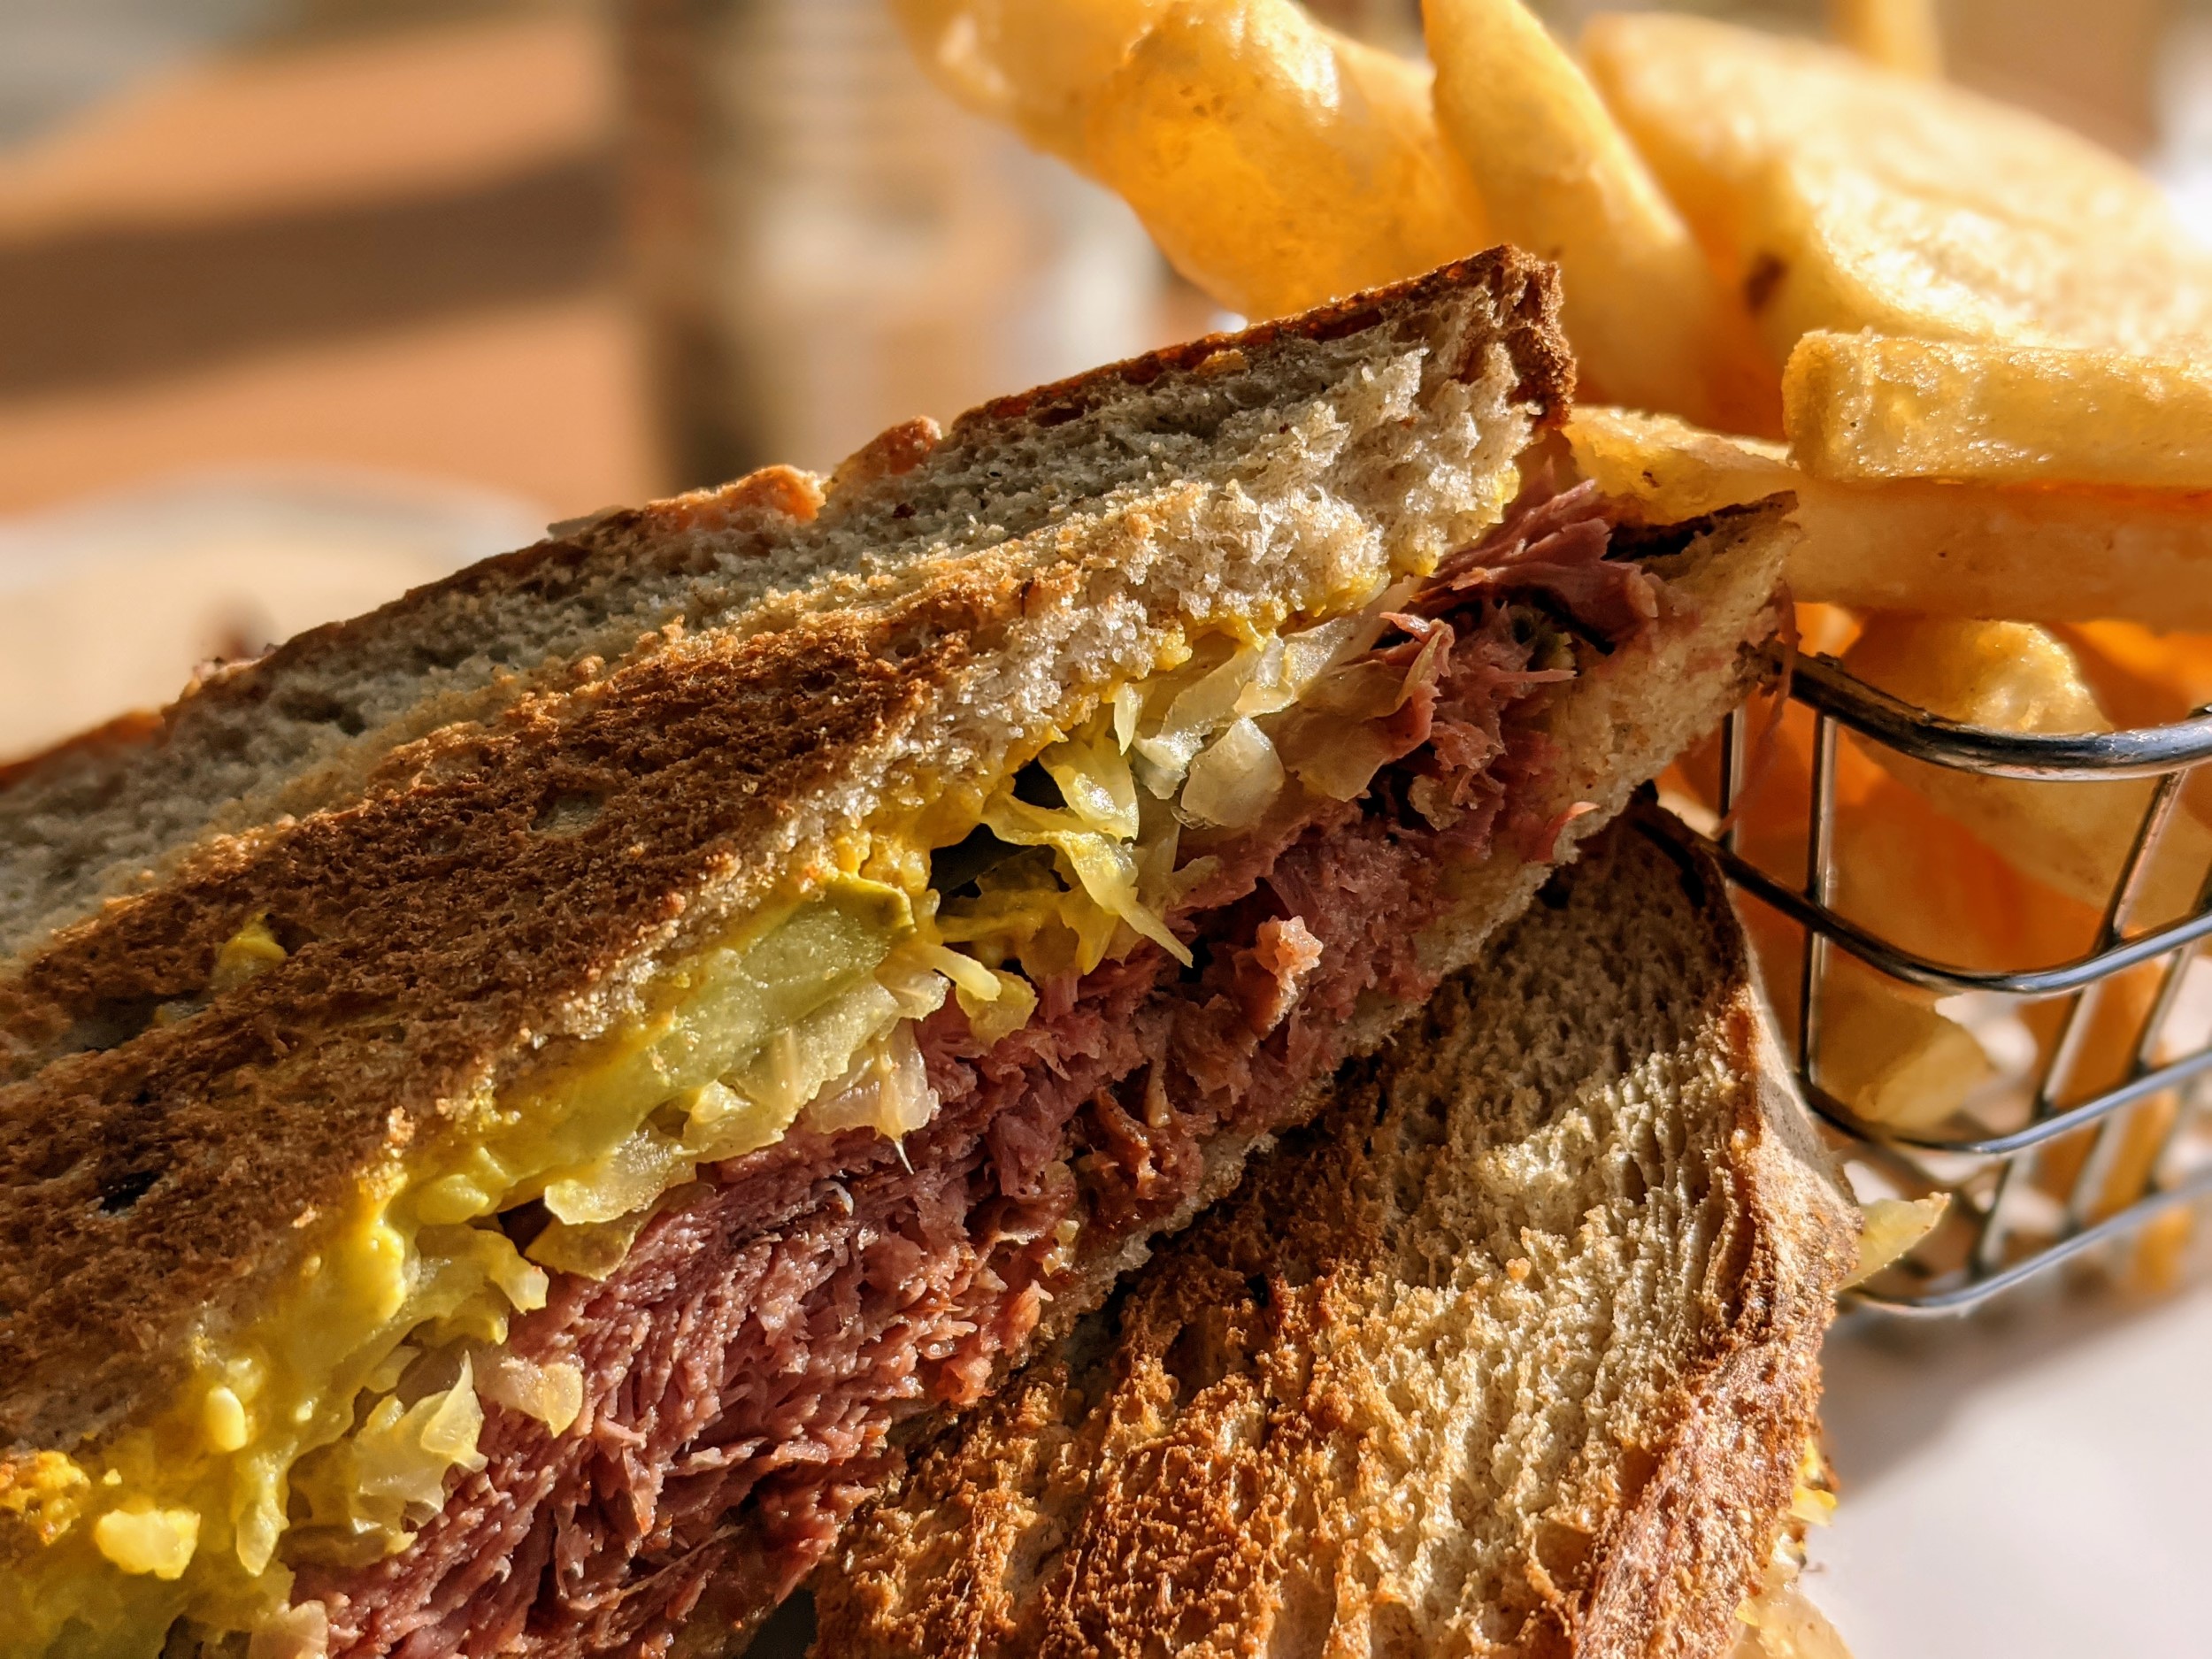 Closeup of part of a reuben sandwich with toasted brown bread, with a basket of fries in the background